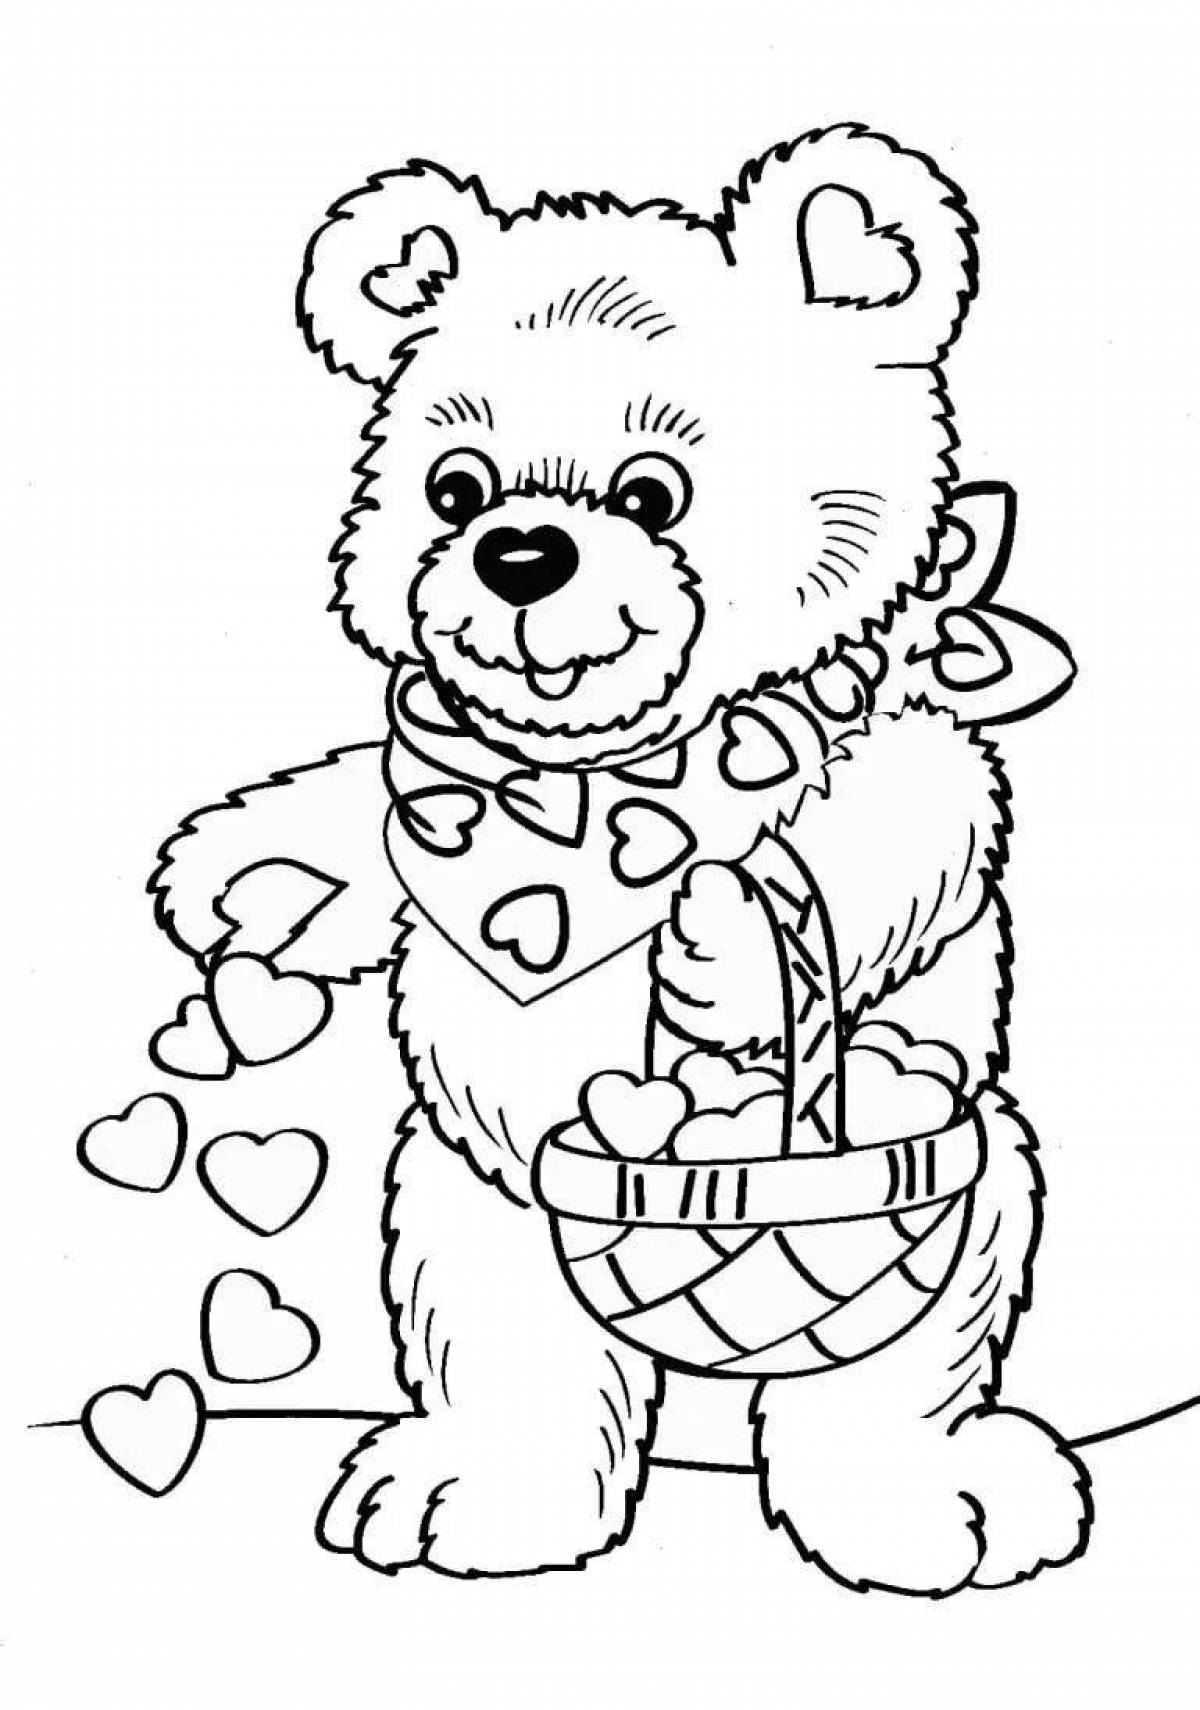 Adorable teddy bear coloring book for 5-6 year olds